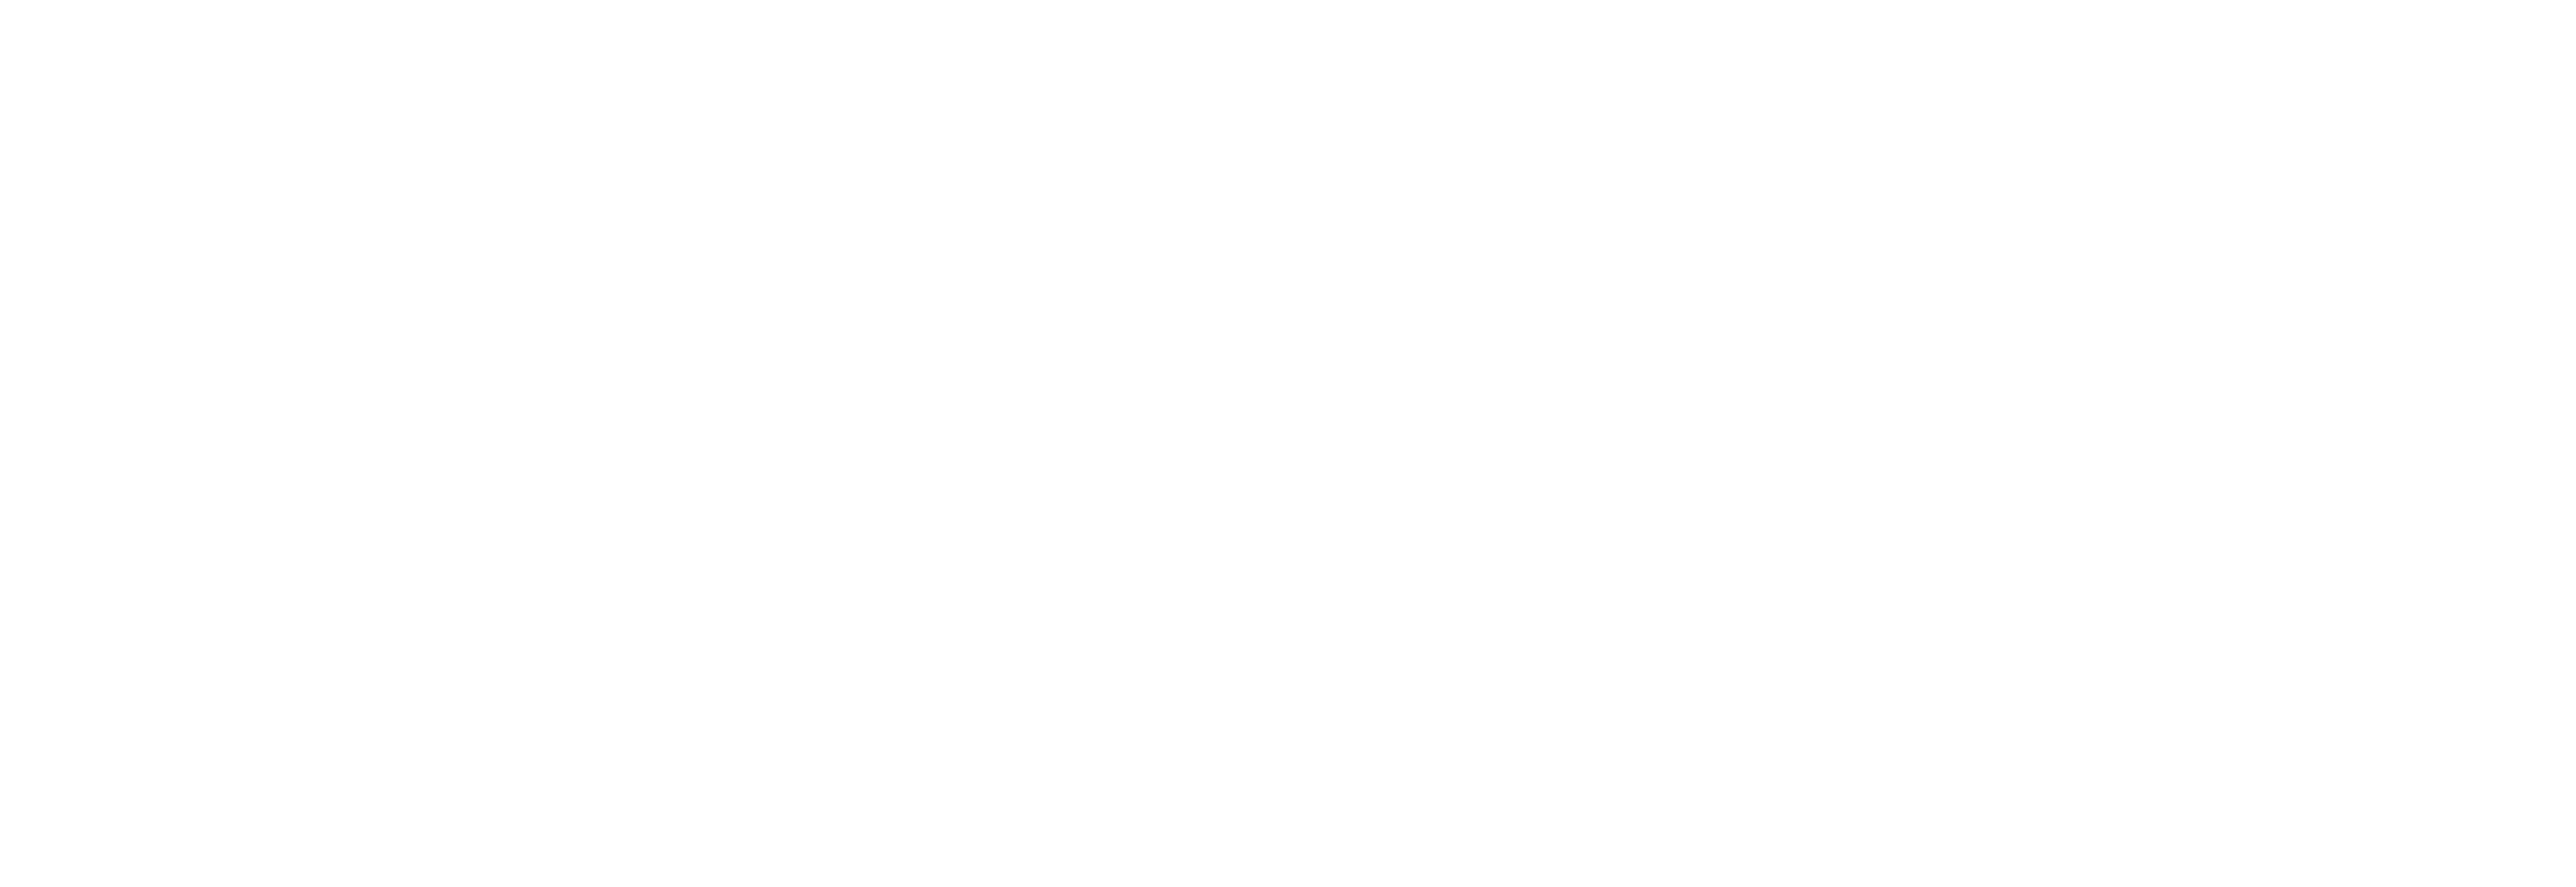 Dependency and Recovery South Yorkshire logo in white